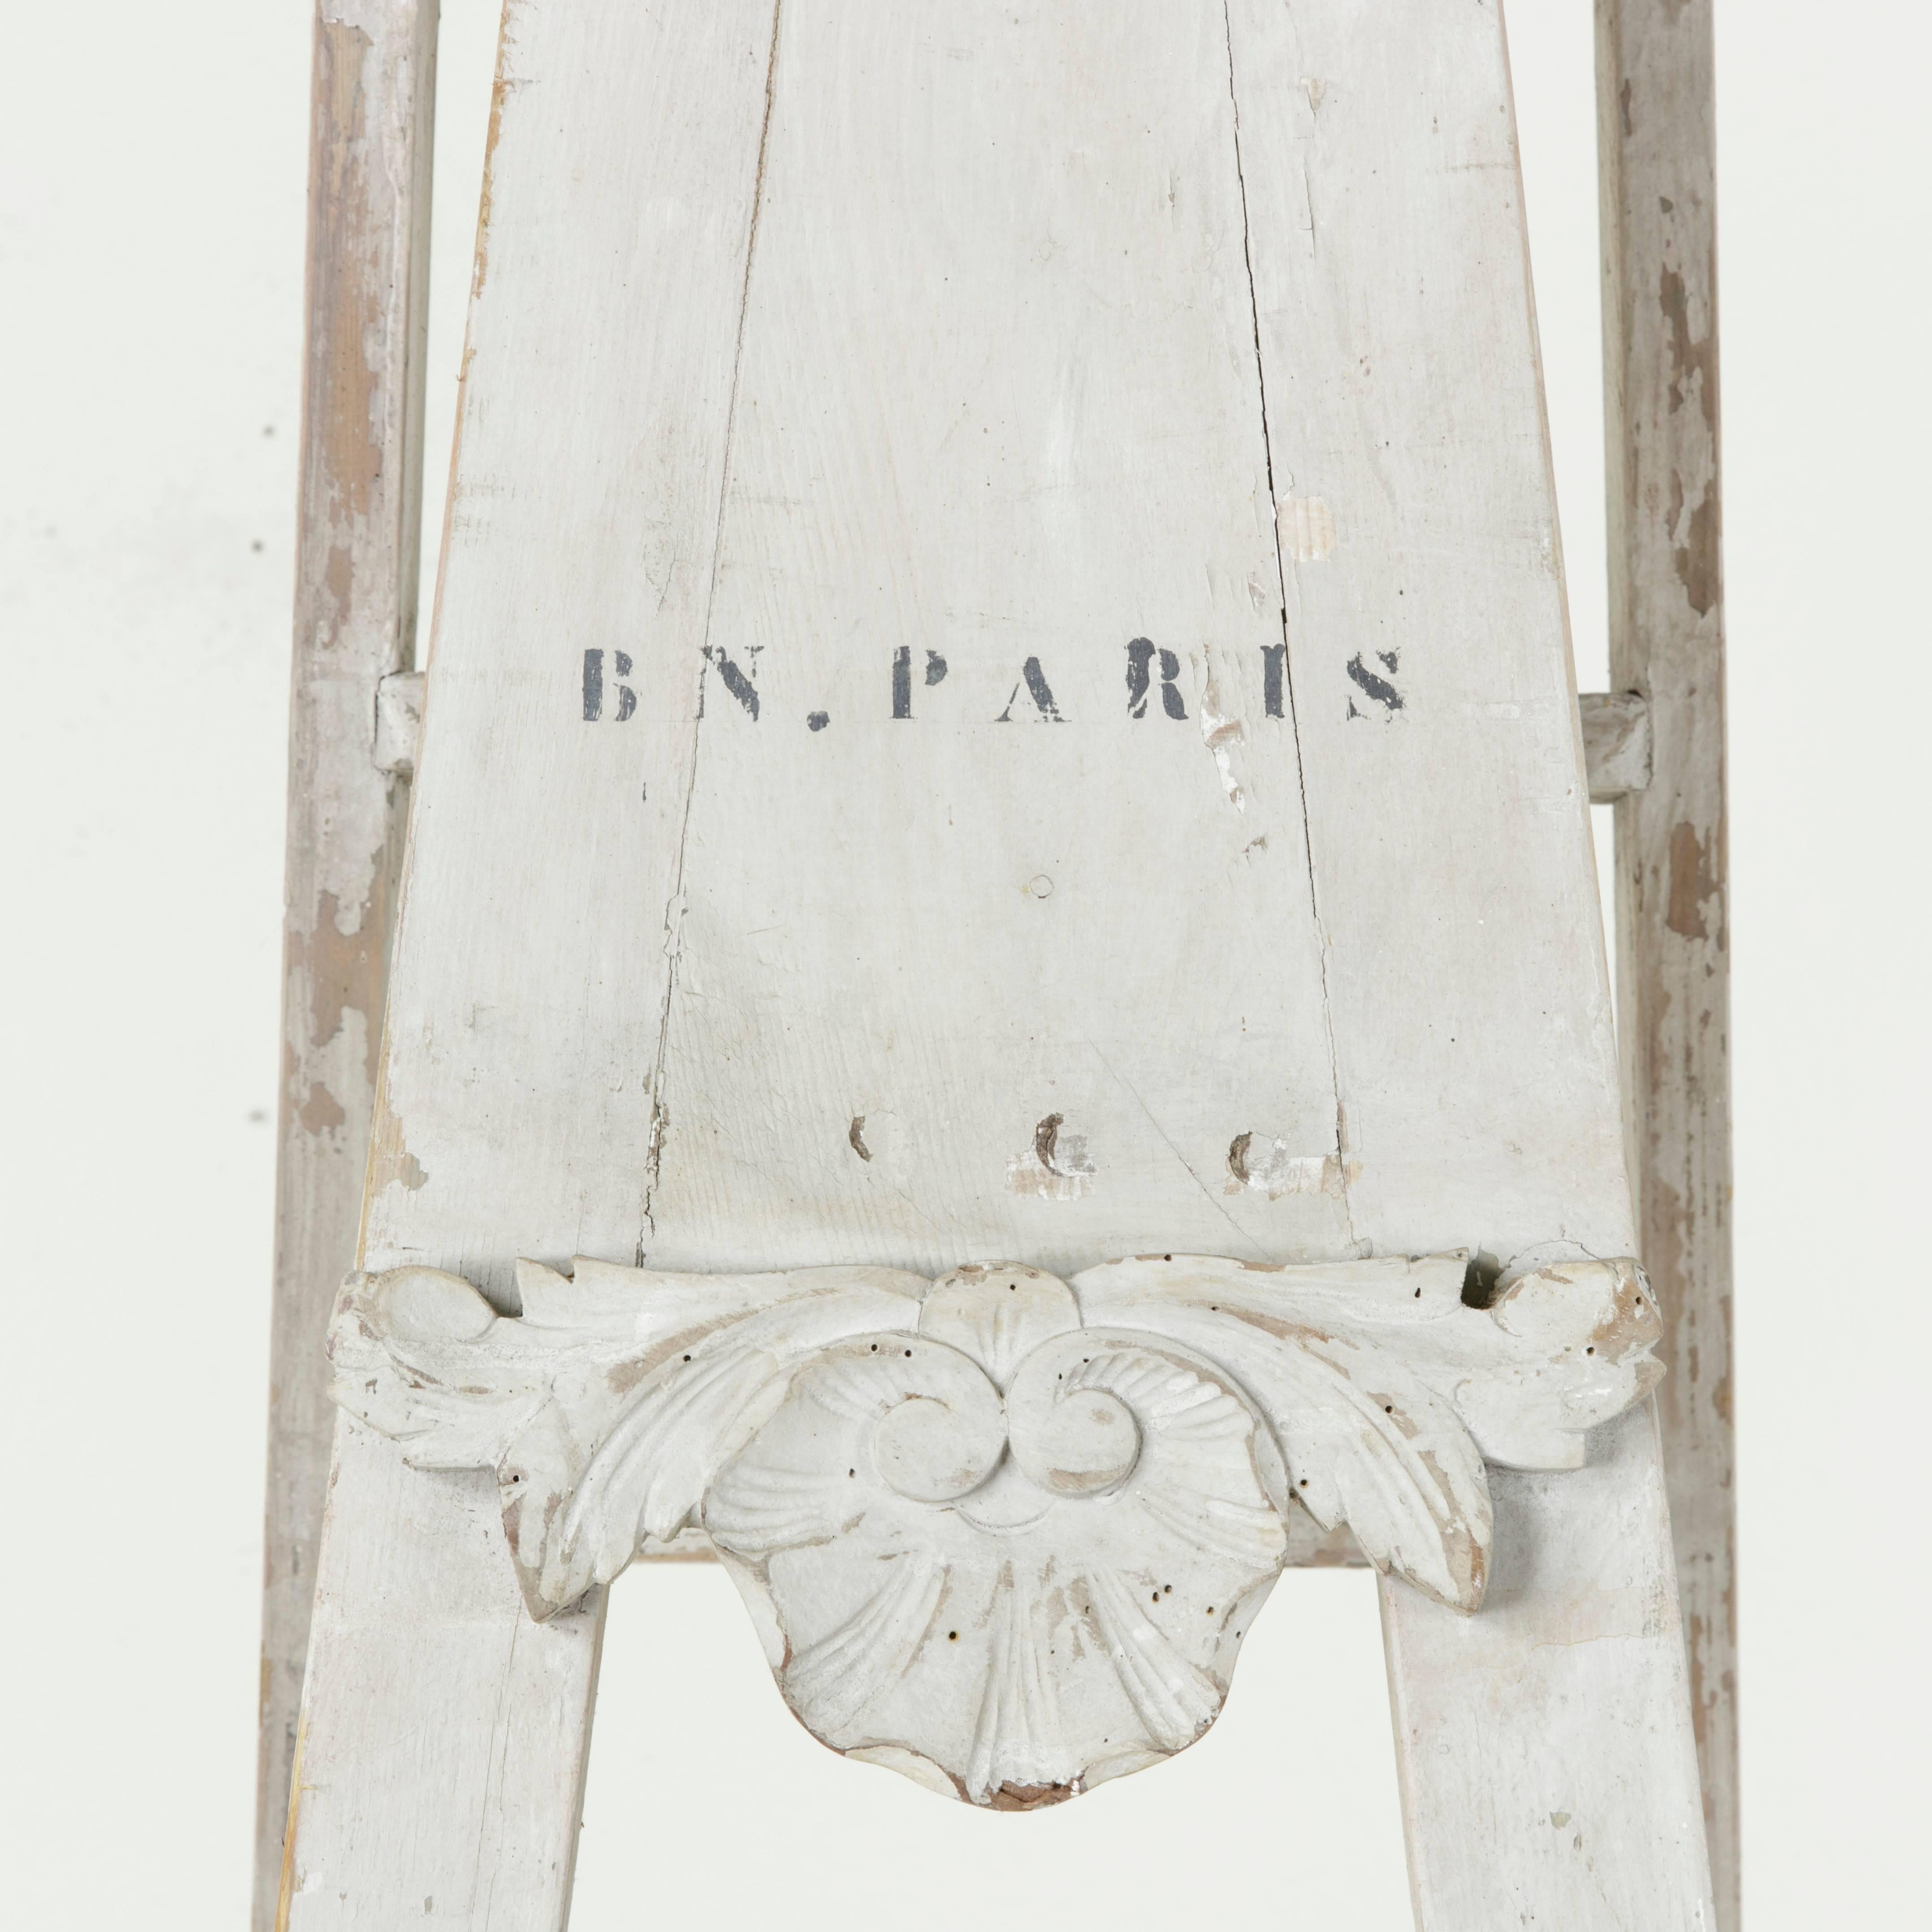 An historic find, this very tall painted folding library ladder is marked B.N. Paris from the Bibliothe`que Nationale de Paris and stands at just over six and a half feet in height. It folds flat for easy moving. This piece was originally used in